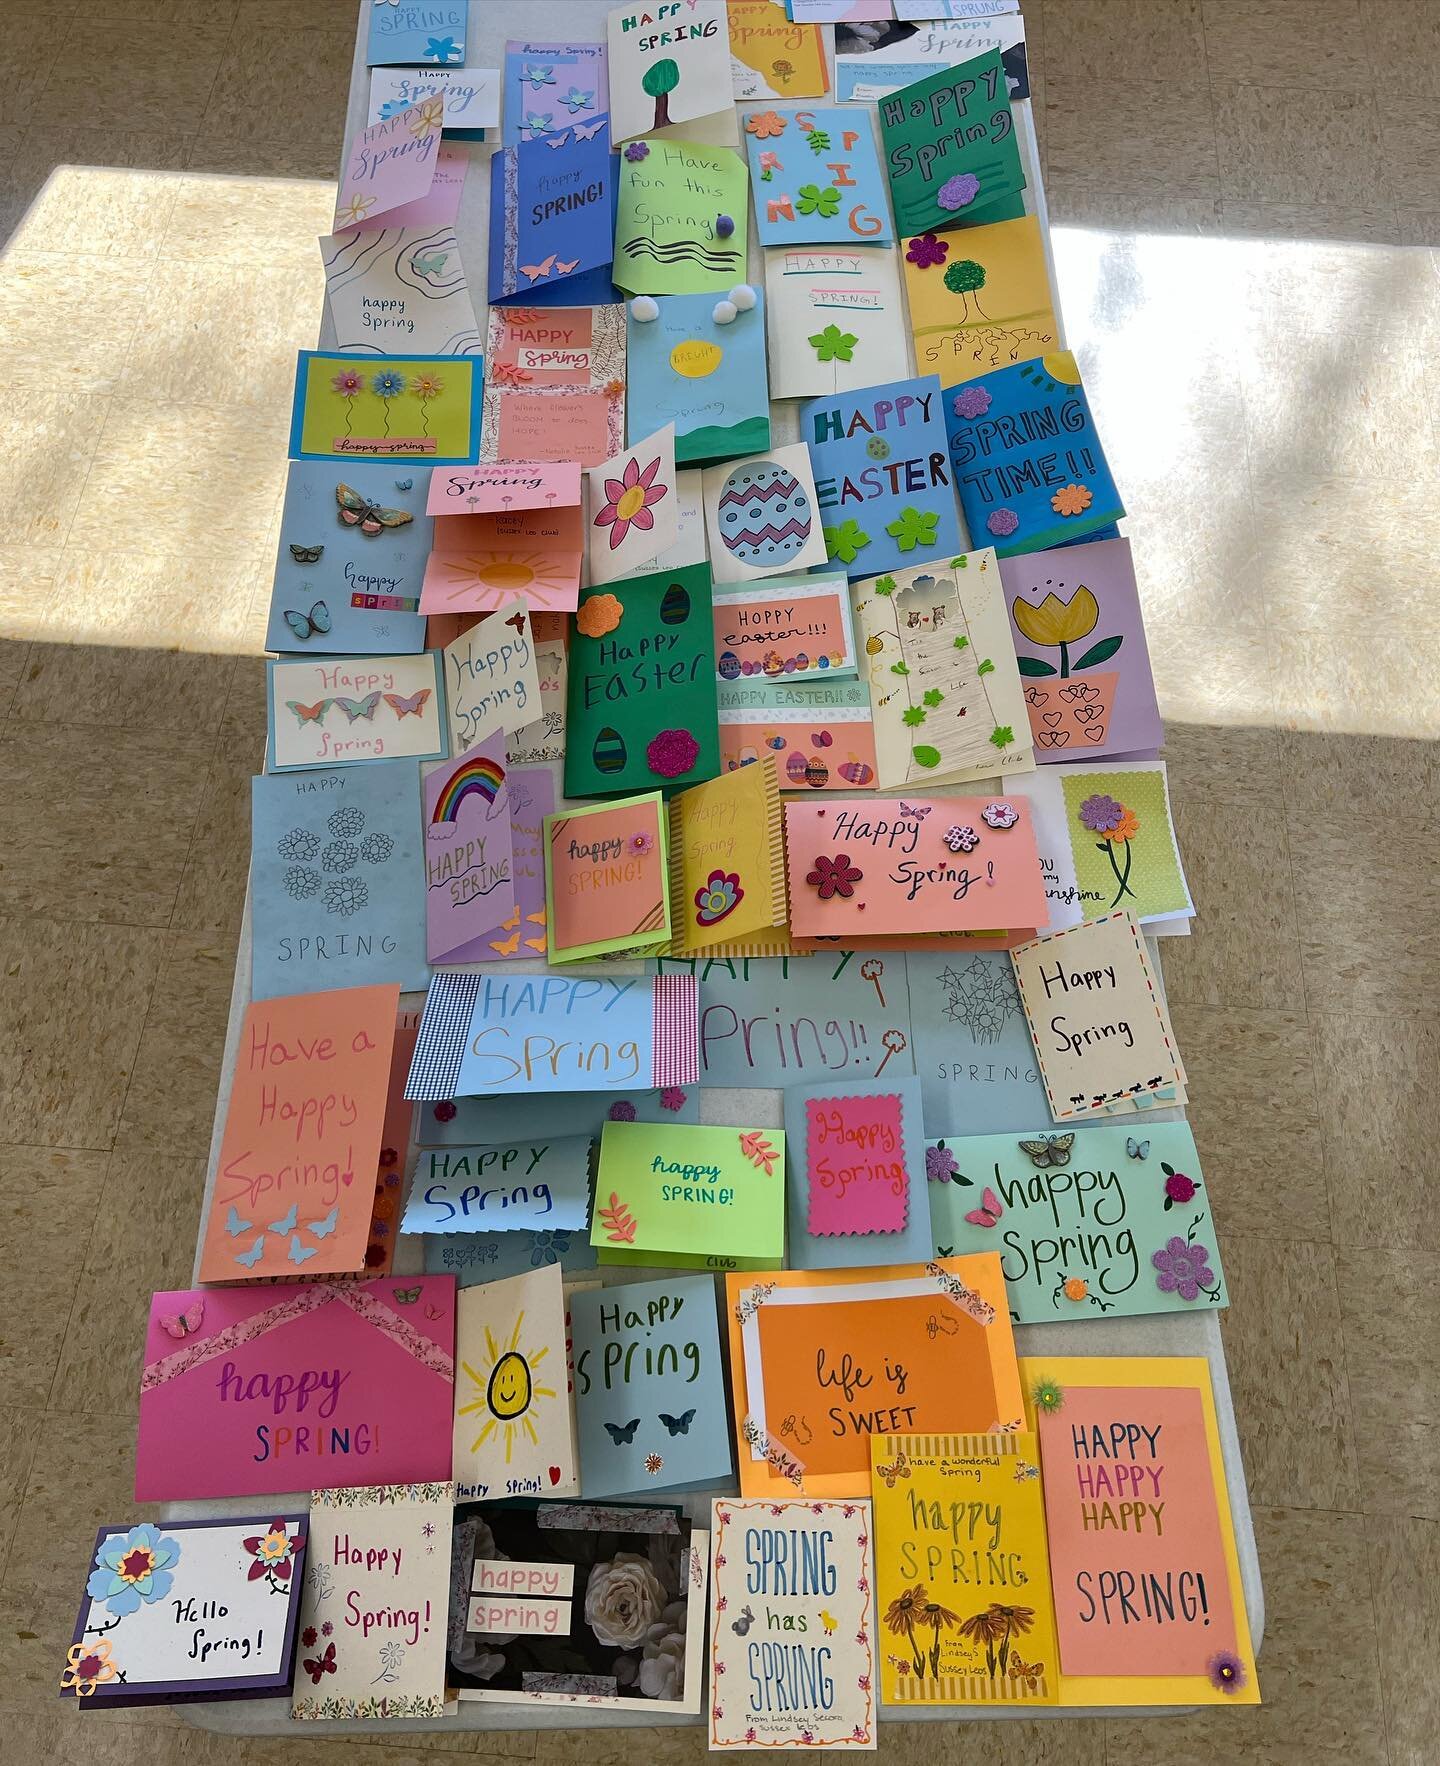 Spring is right around the corner, so our Leos showed their artistic sides by making spring-themed cards for residents in local nursing homes! We made a total of 60 cards with positive spring messages inside in hopes of brightening residents&rsquo; d